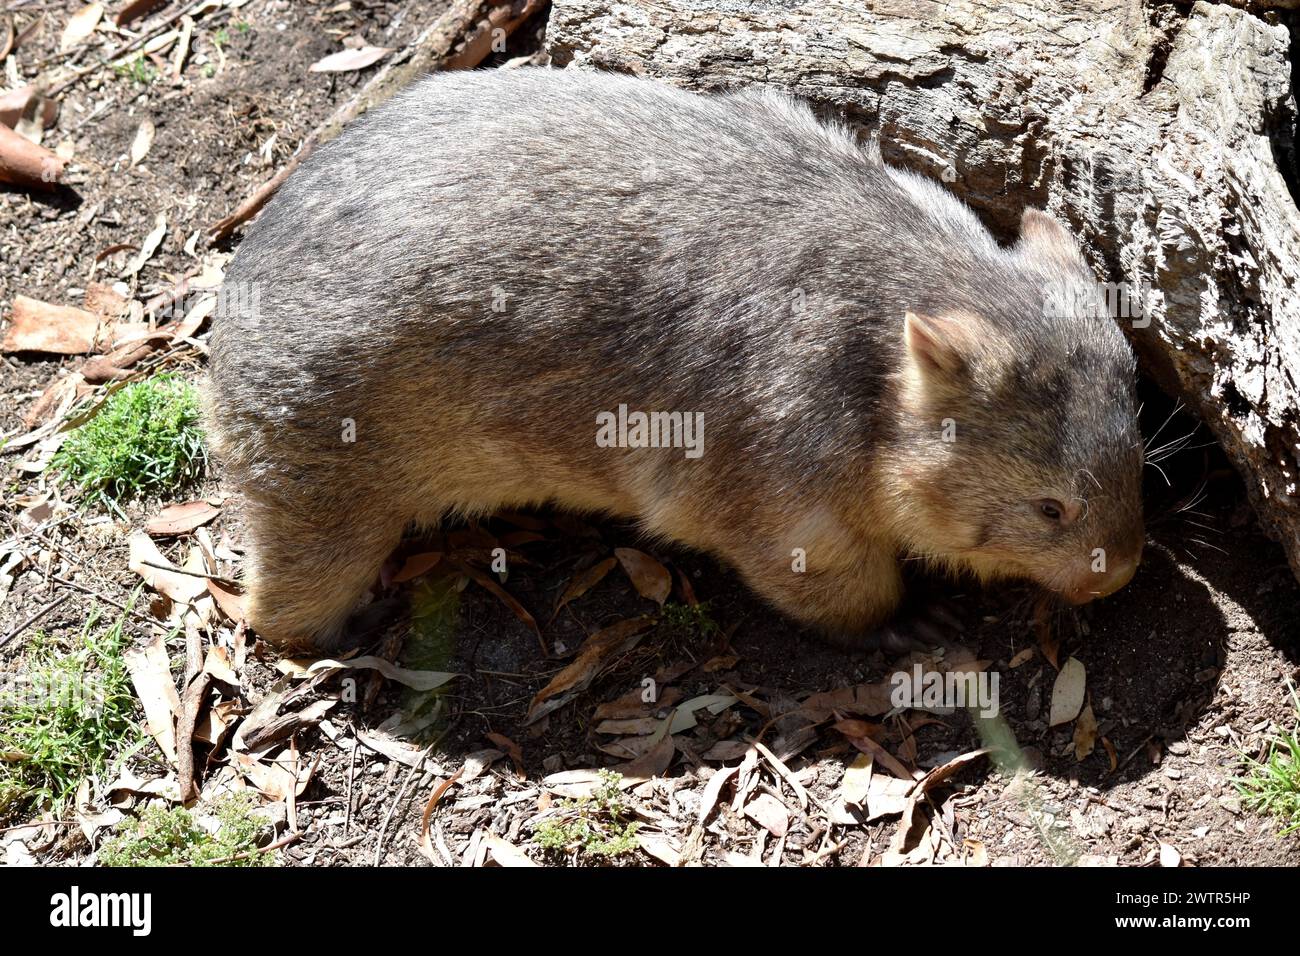 The Common Wombat has a large nose which is shiny black, much like that of a dog. The ears are relatively small, triangular, and slightly rounded Stock Photo